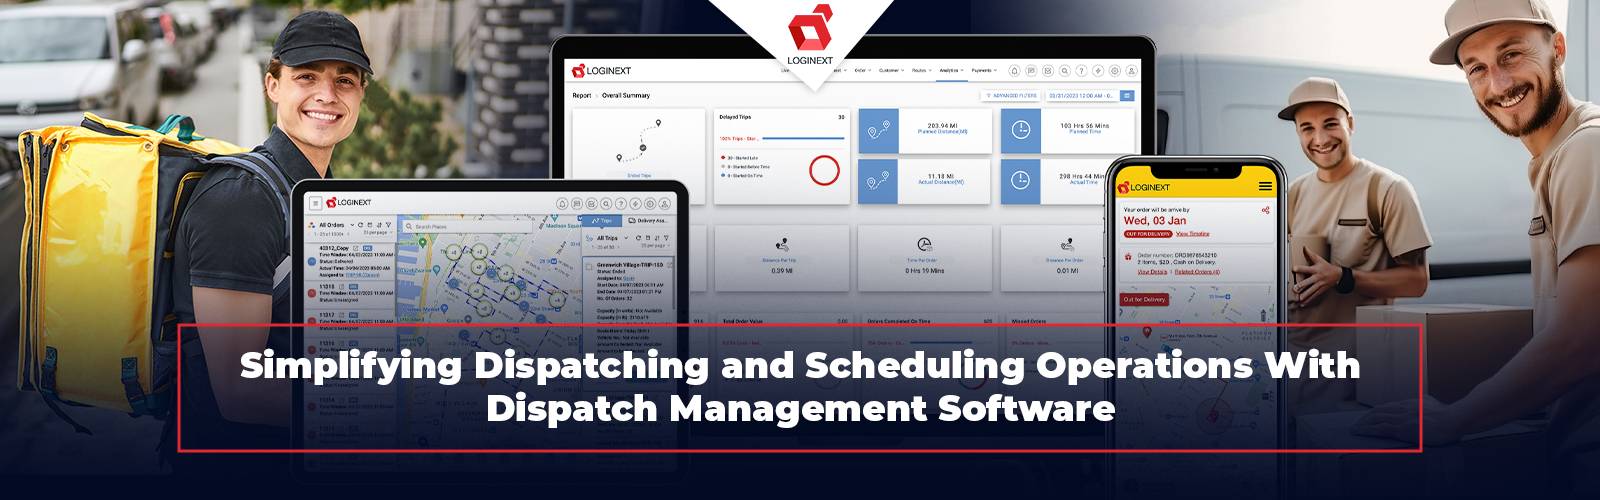 Dispatching and Scheduling Operations Using Dispatch Management Software